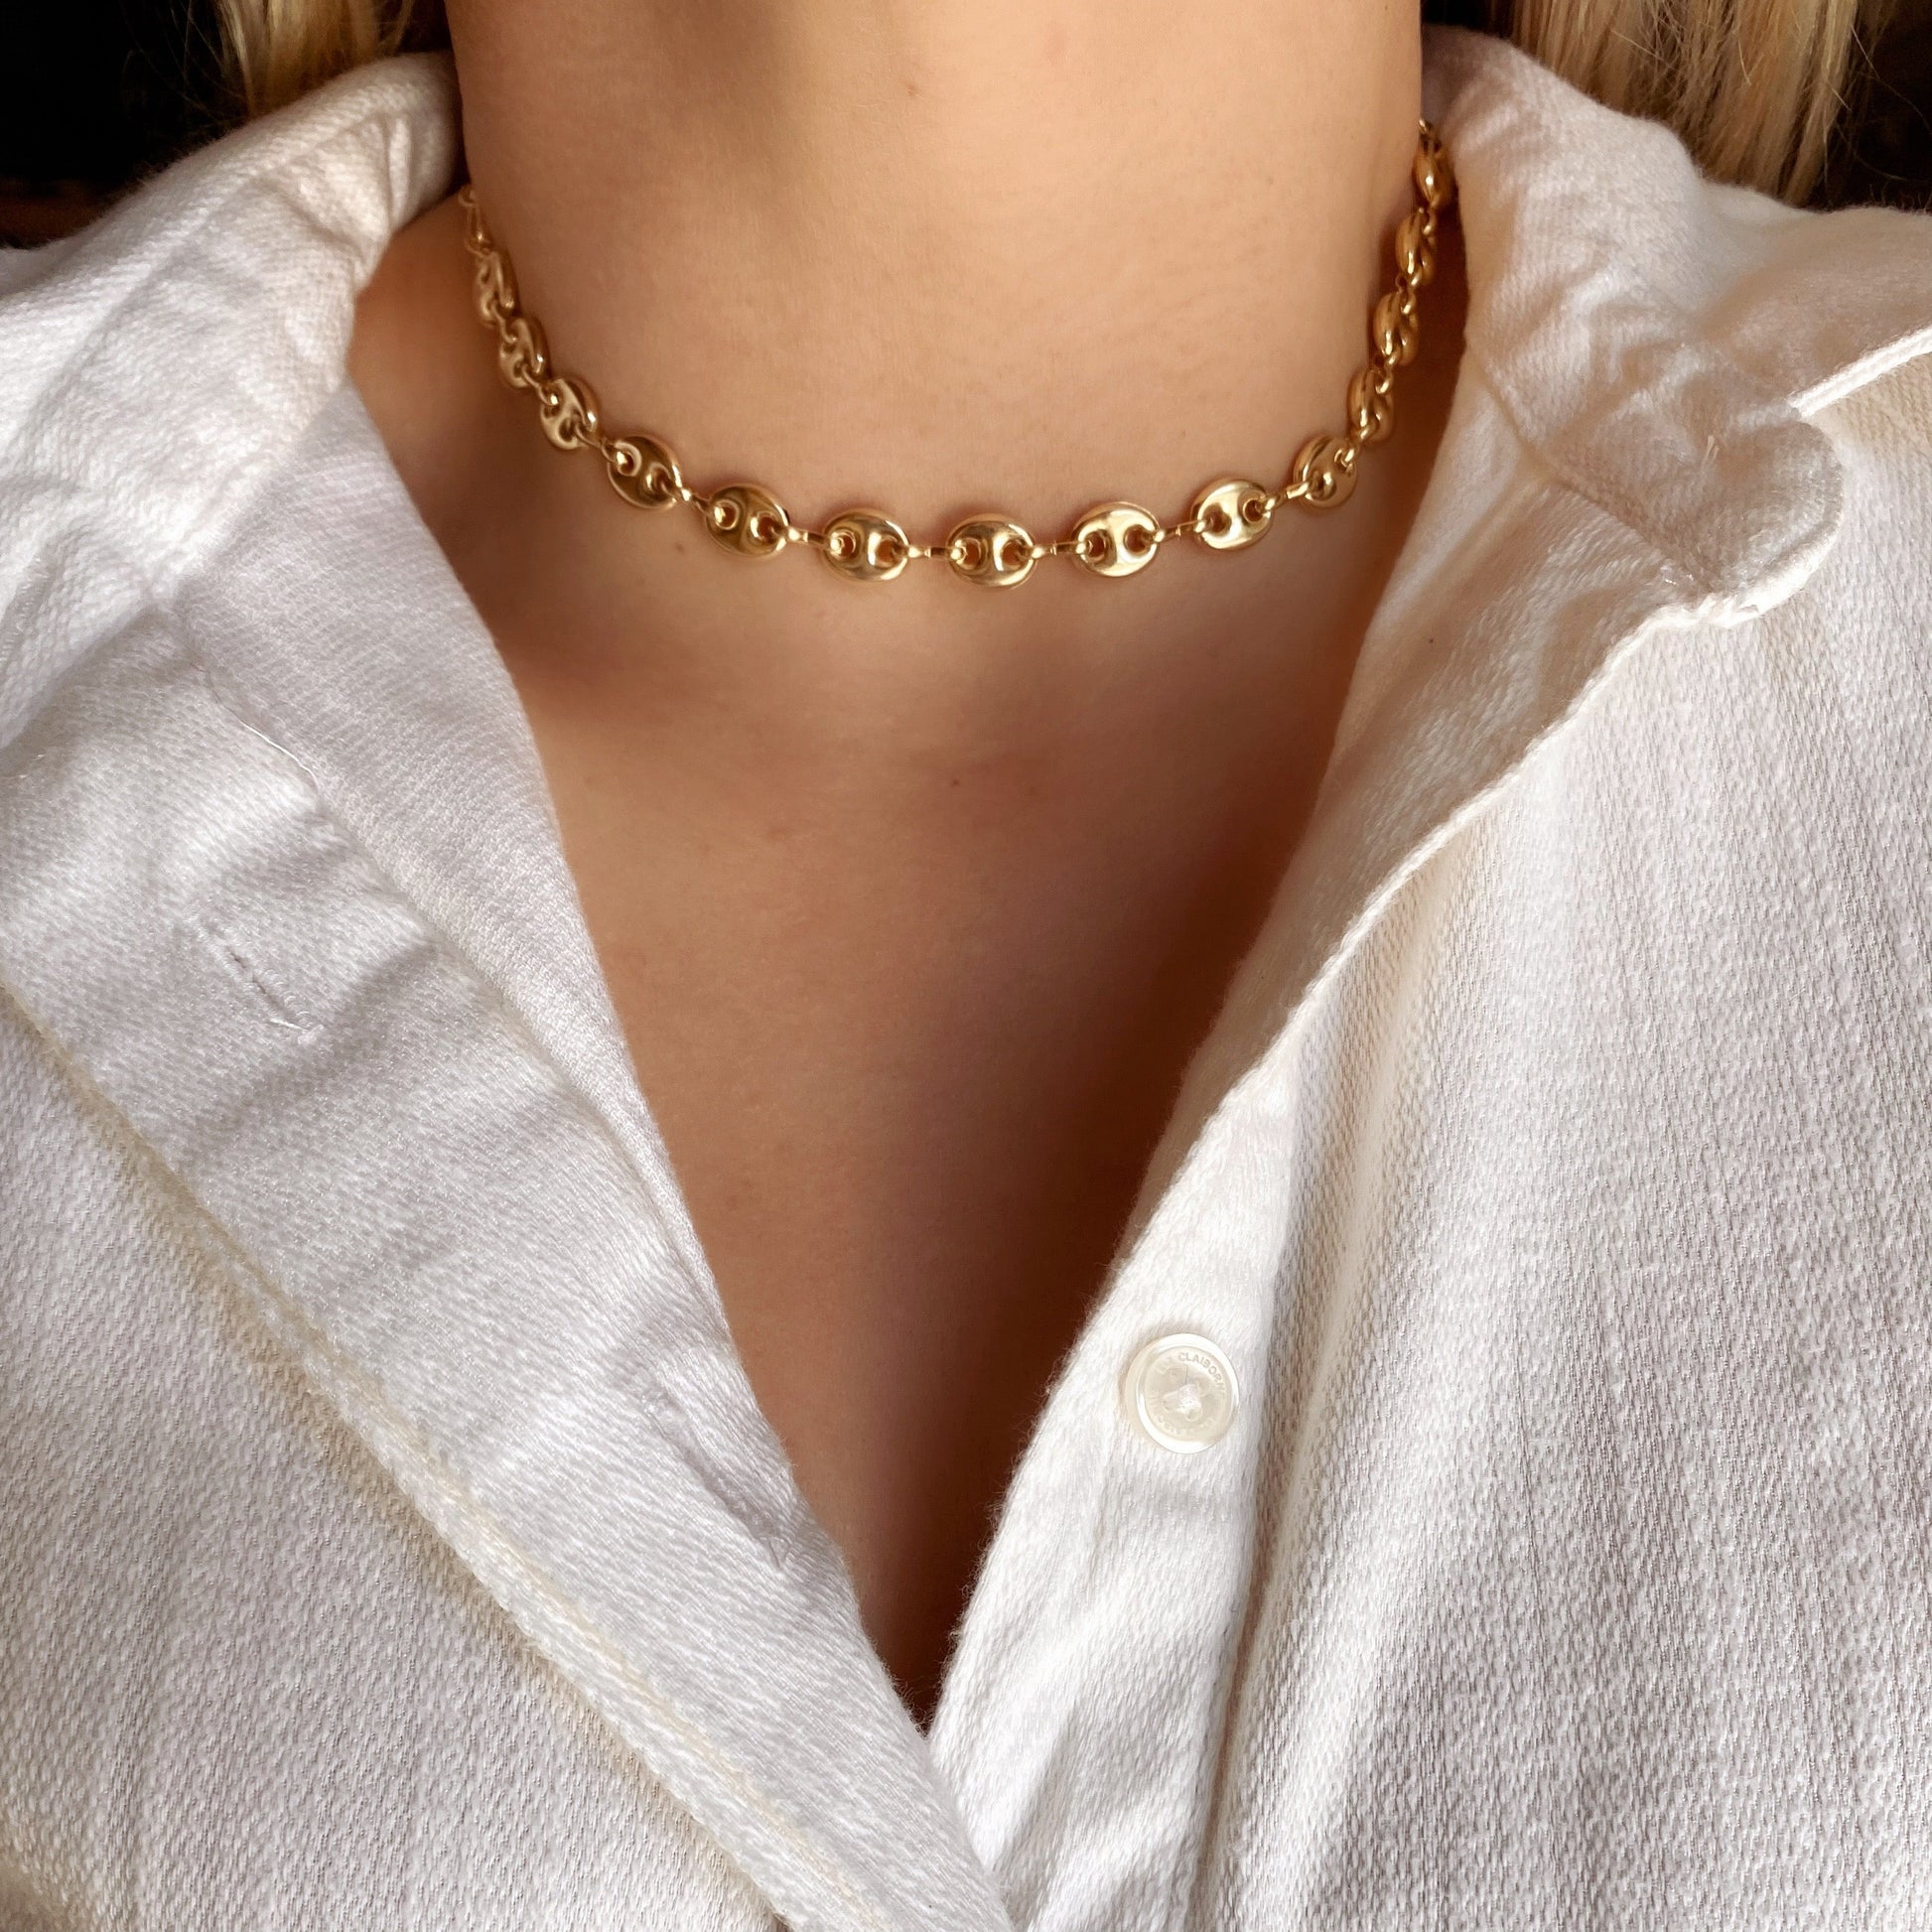 GoldFi 18k Gold Filled Puffy Mariner Choker Featuring Unique Chain Extender